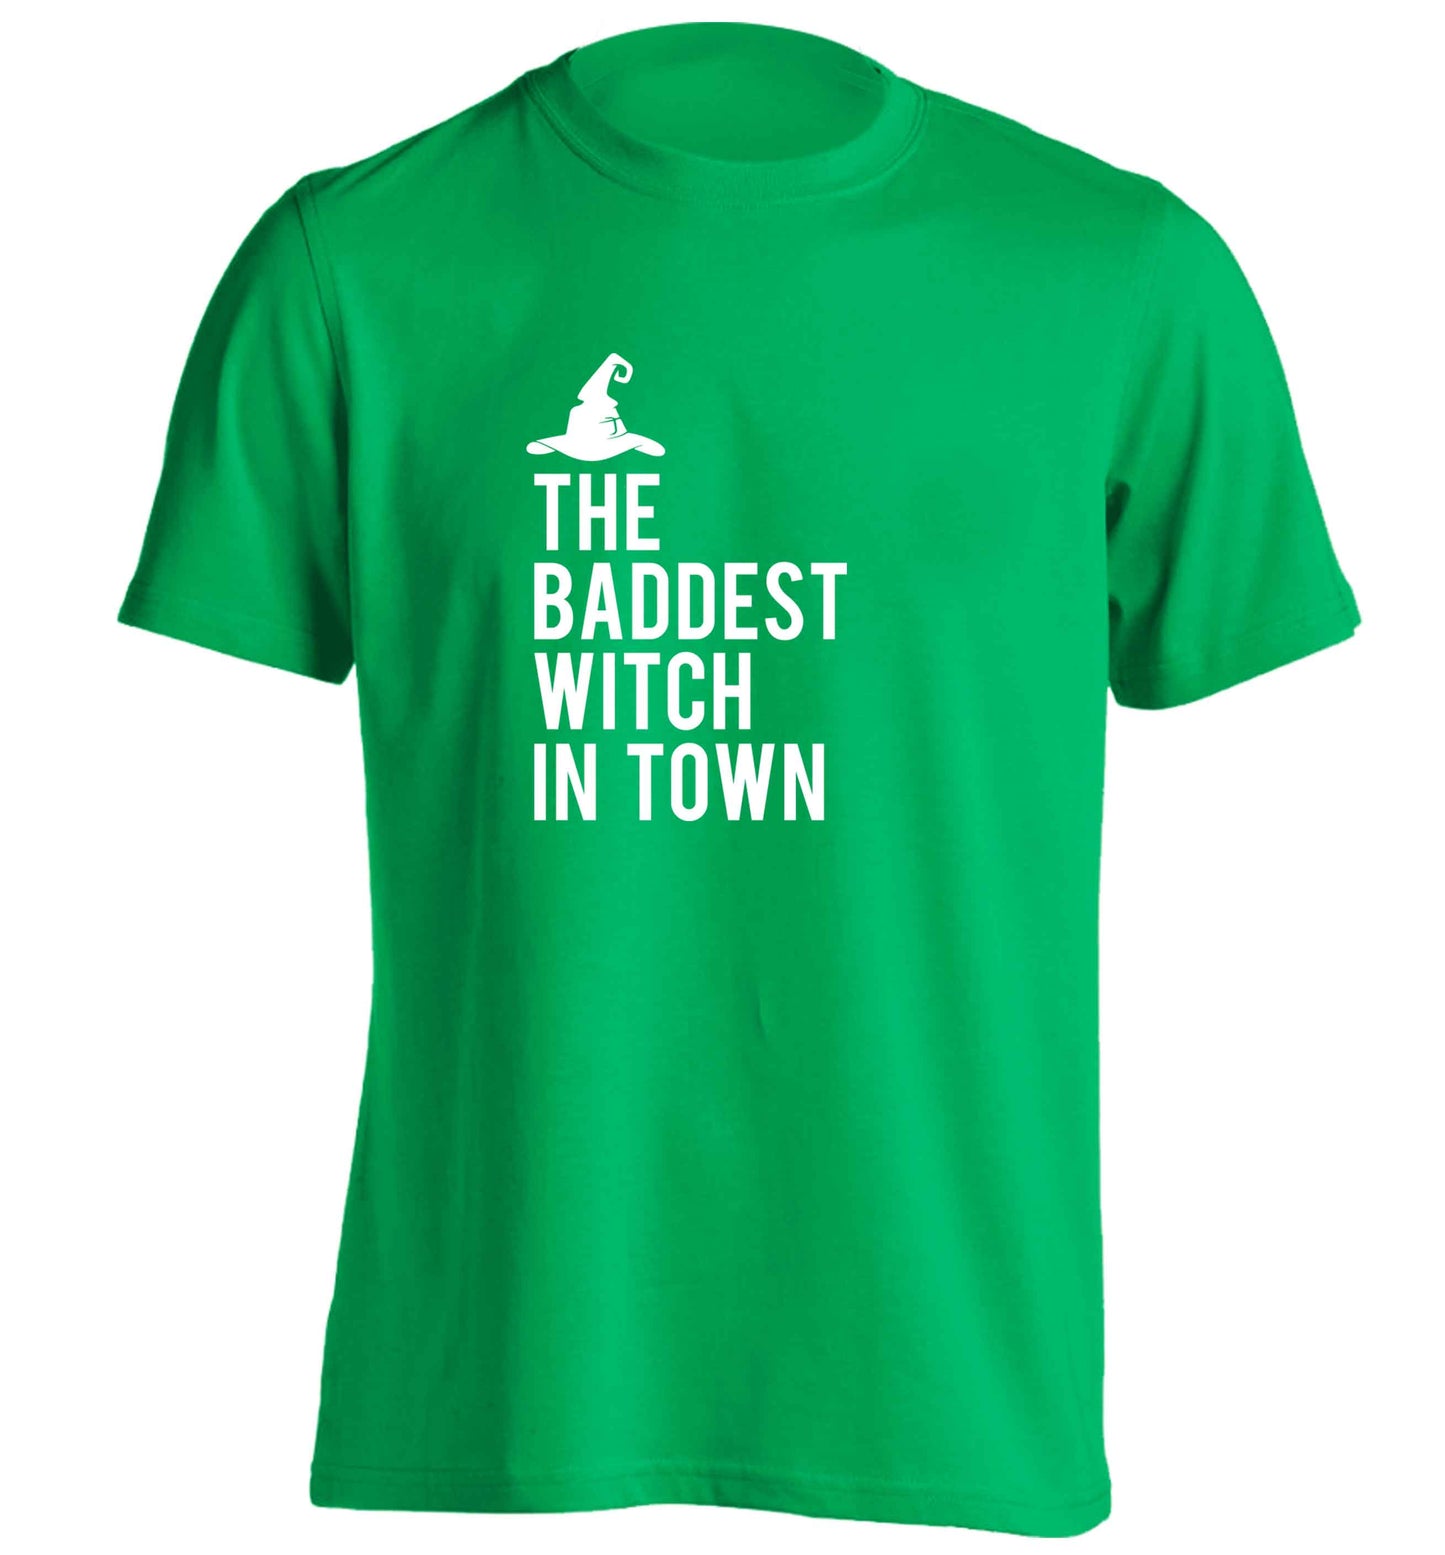 Badest witch in town adults unisex green Tshirt 2XL